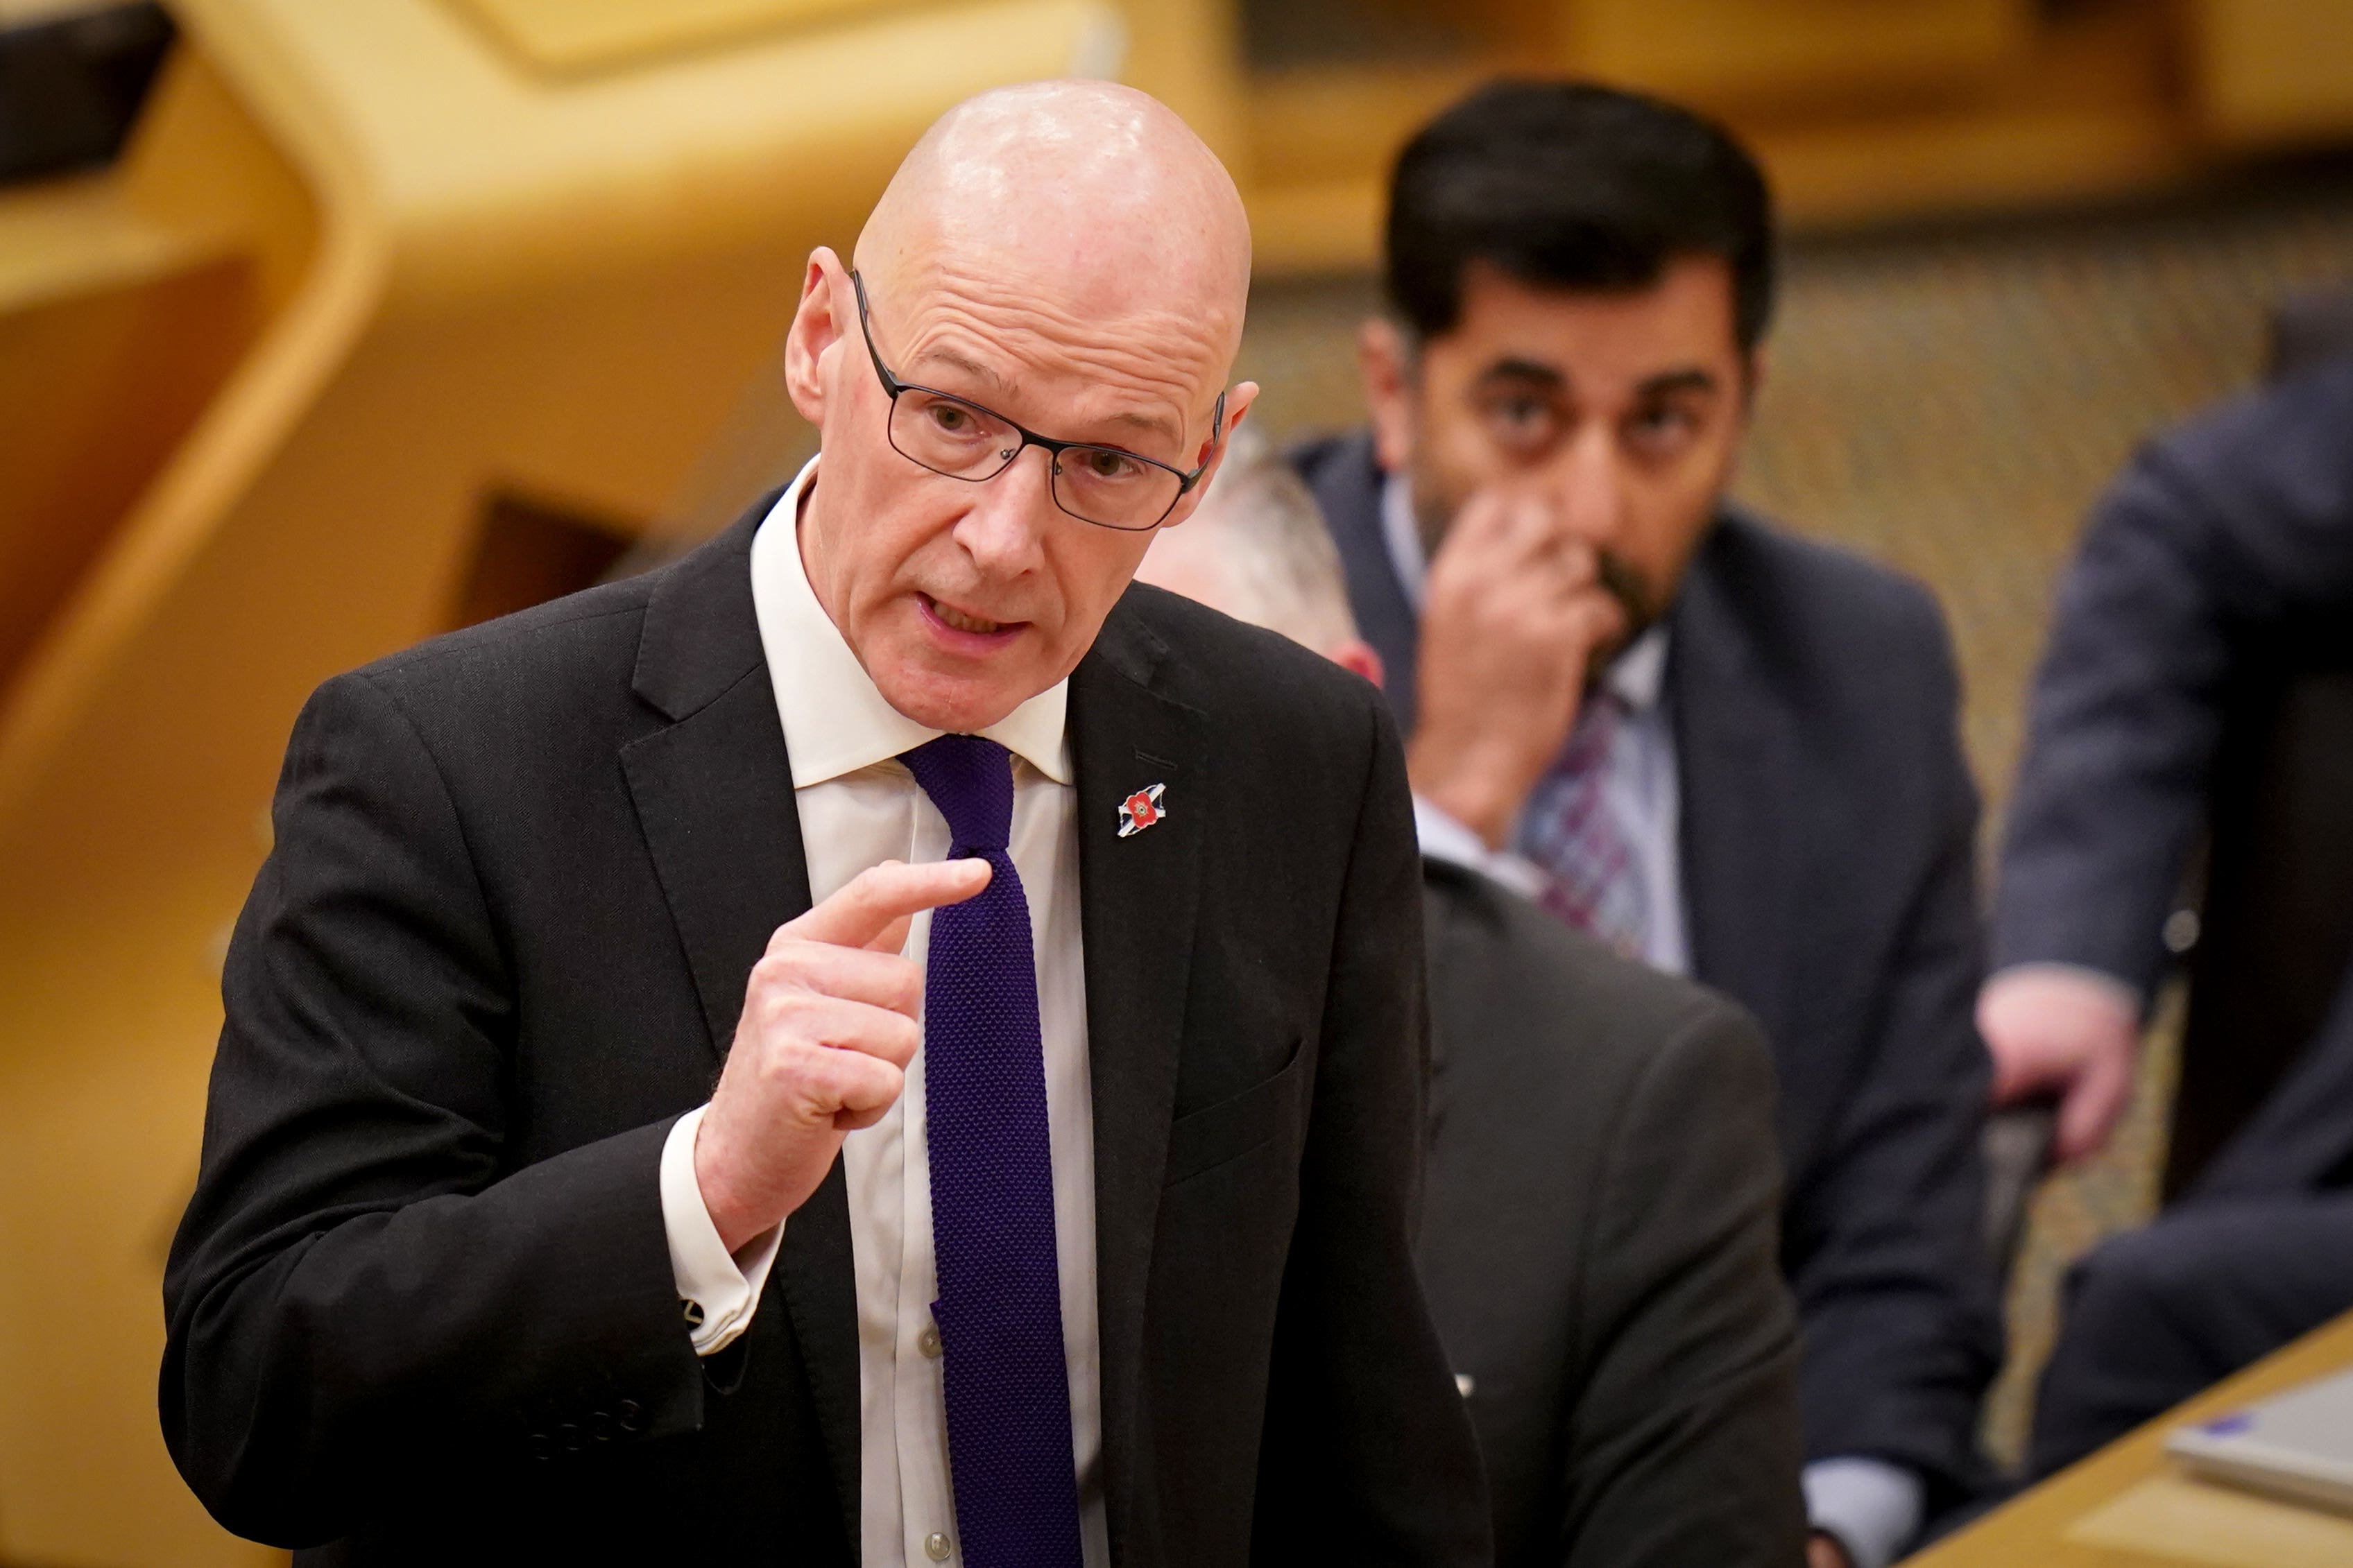 Cuts in UK spending will have ‘severe knock-on impacts on the Scottish Budget’ and public services north of the border, Deputy First Minister John Swinney has warned (Jane Barlow/PA)